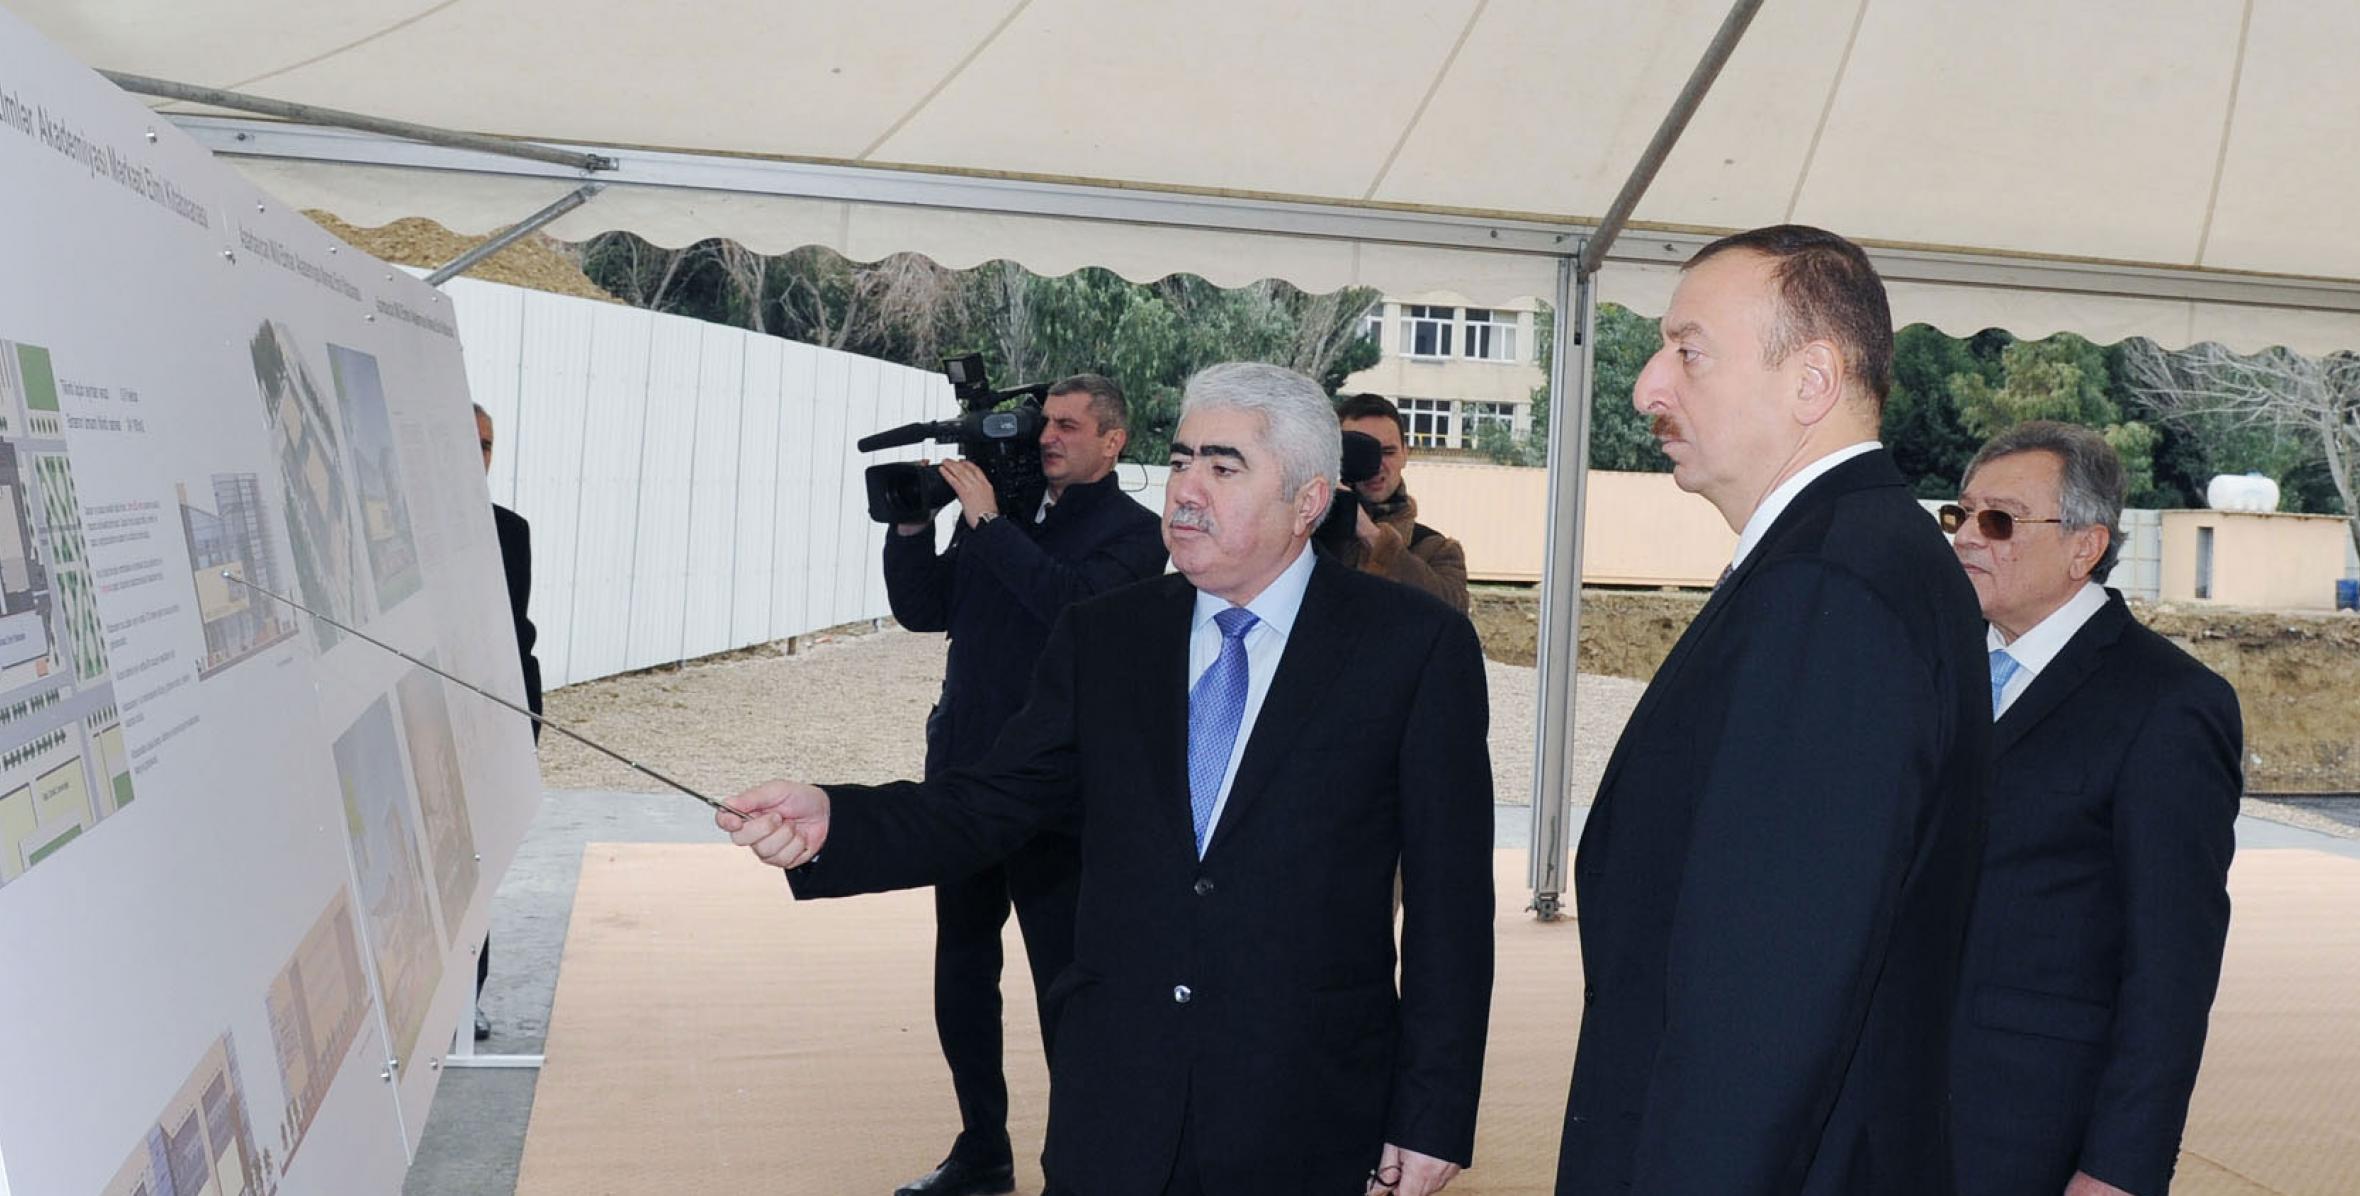 Ilham Aliyev attended the groundbreaking ceremony for the Central Scientific Library of the Azerbaijan National Academy of Sciences